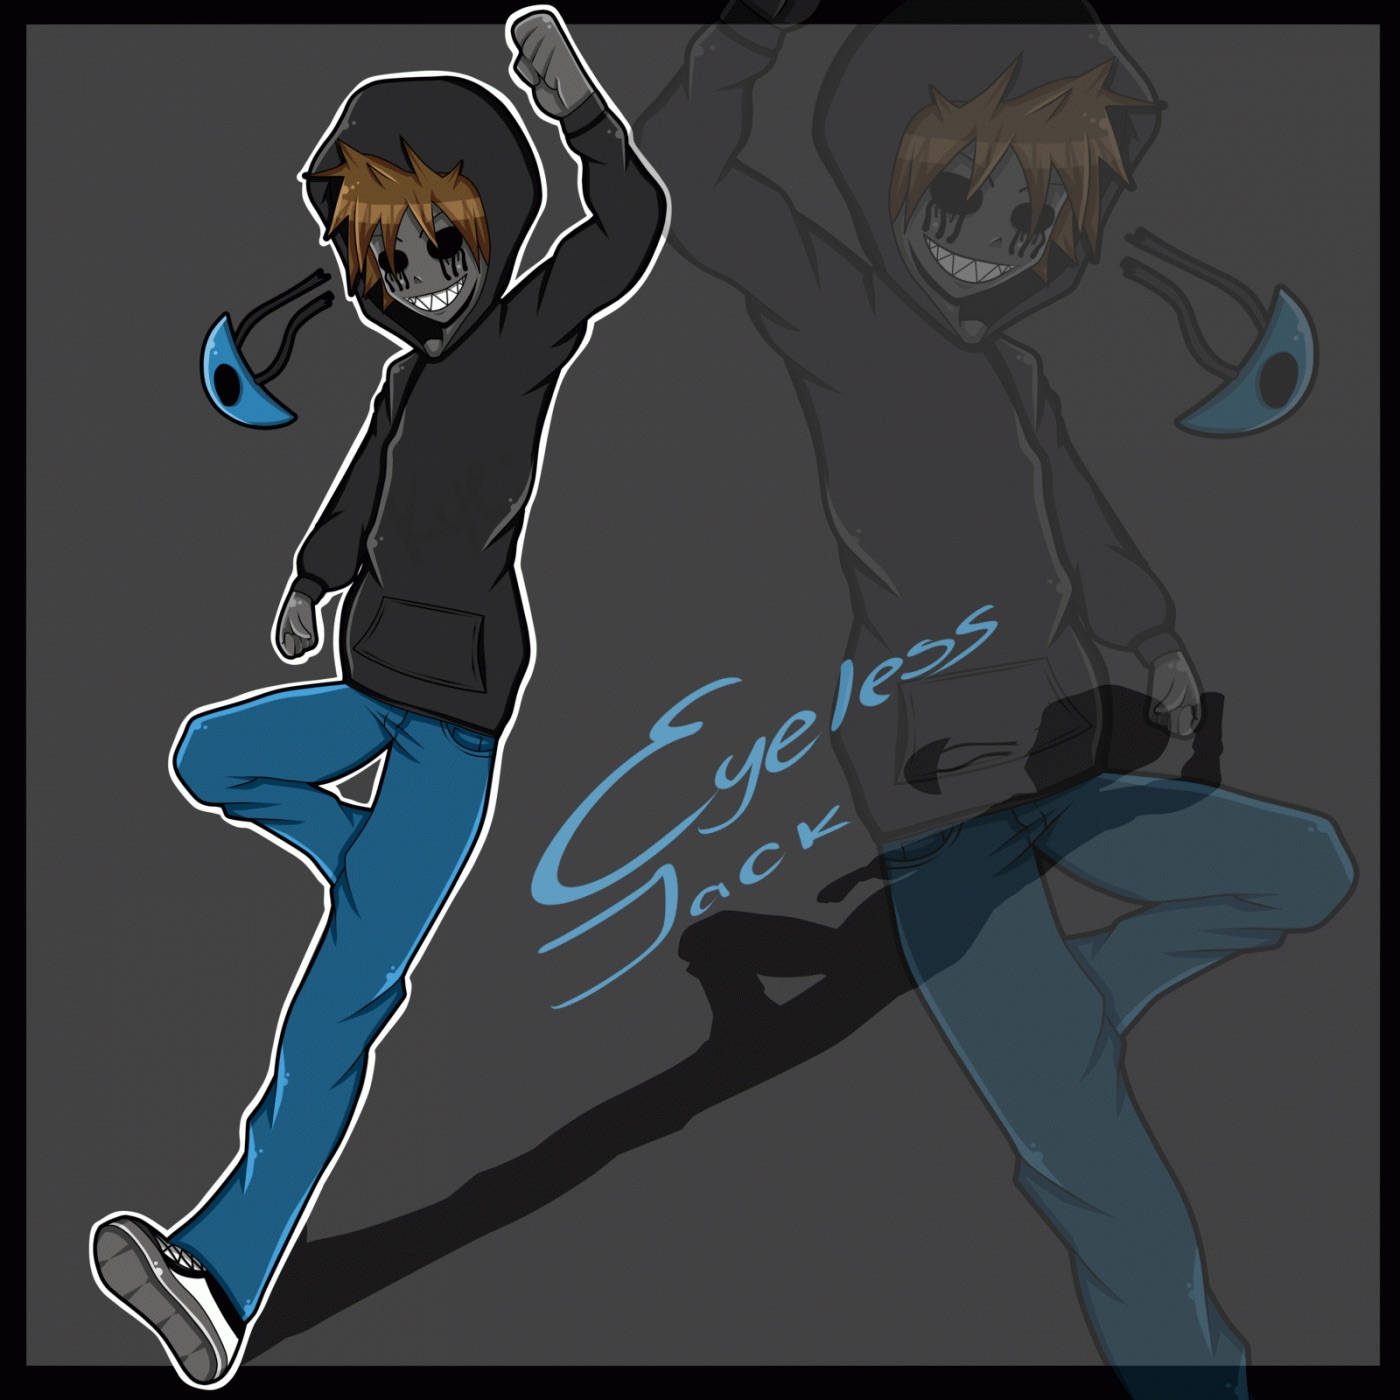 Eyeless Jack in signature blue pants lurking in the darkness Wallpaper